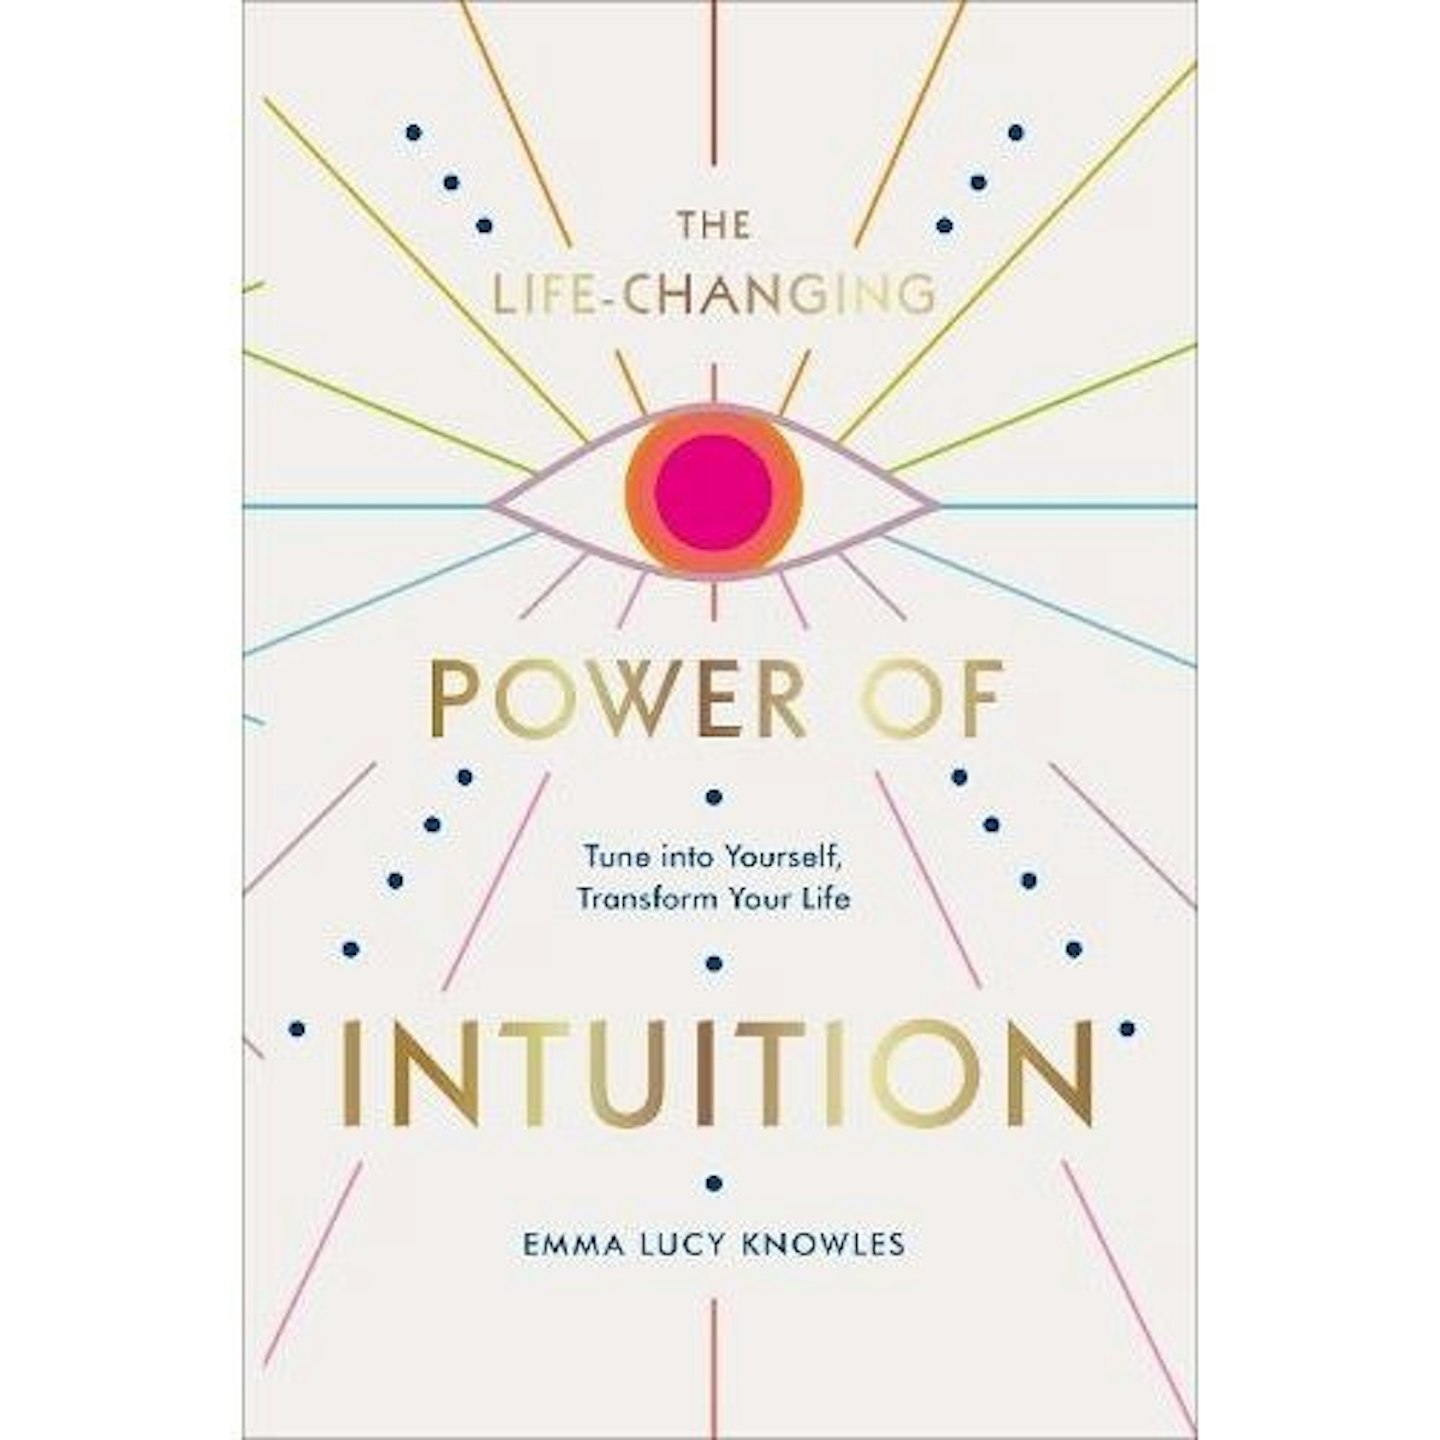 The Life-Changing Power of Intuition by Emma Lucy Knowles